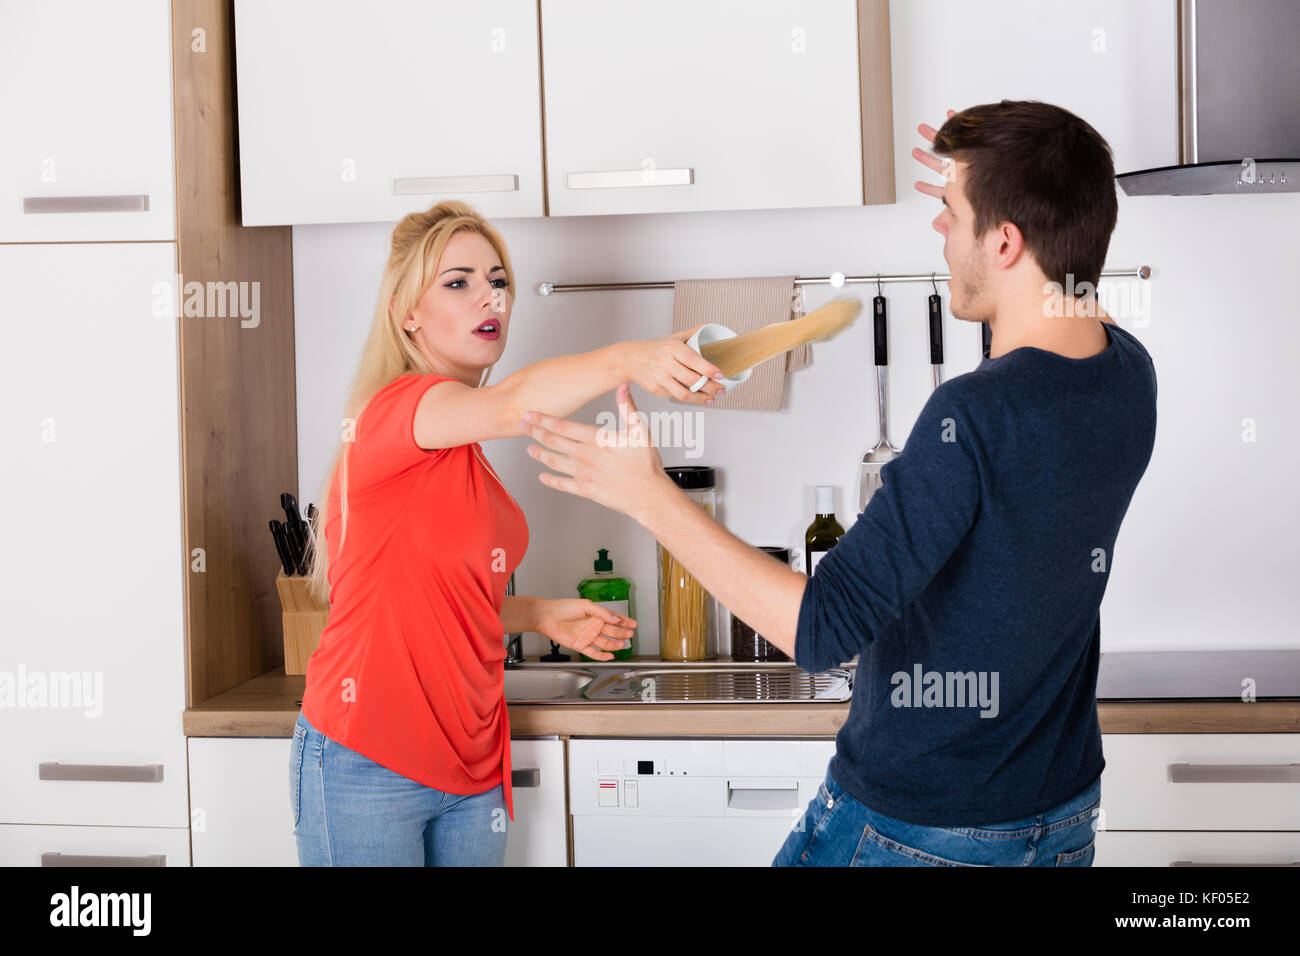 Angry Woman Throwing Cup Of Coffee On Husband While Quarrel About Infidelity And Divorce Stock Photo